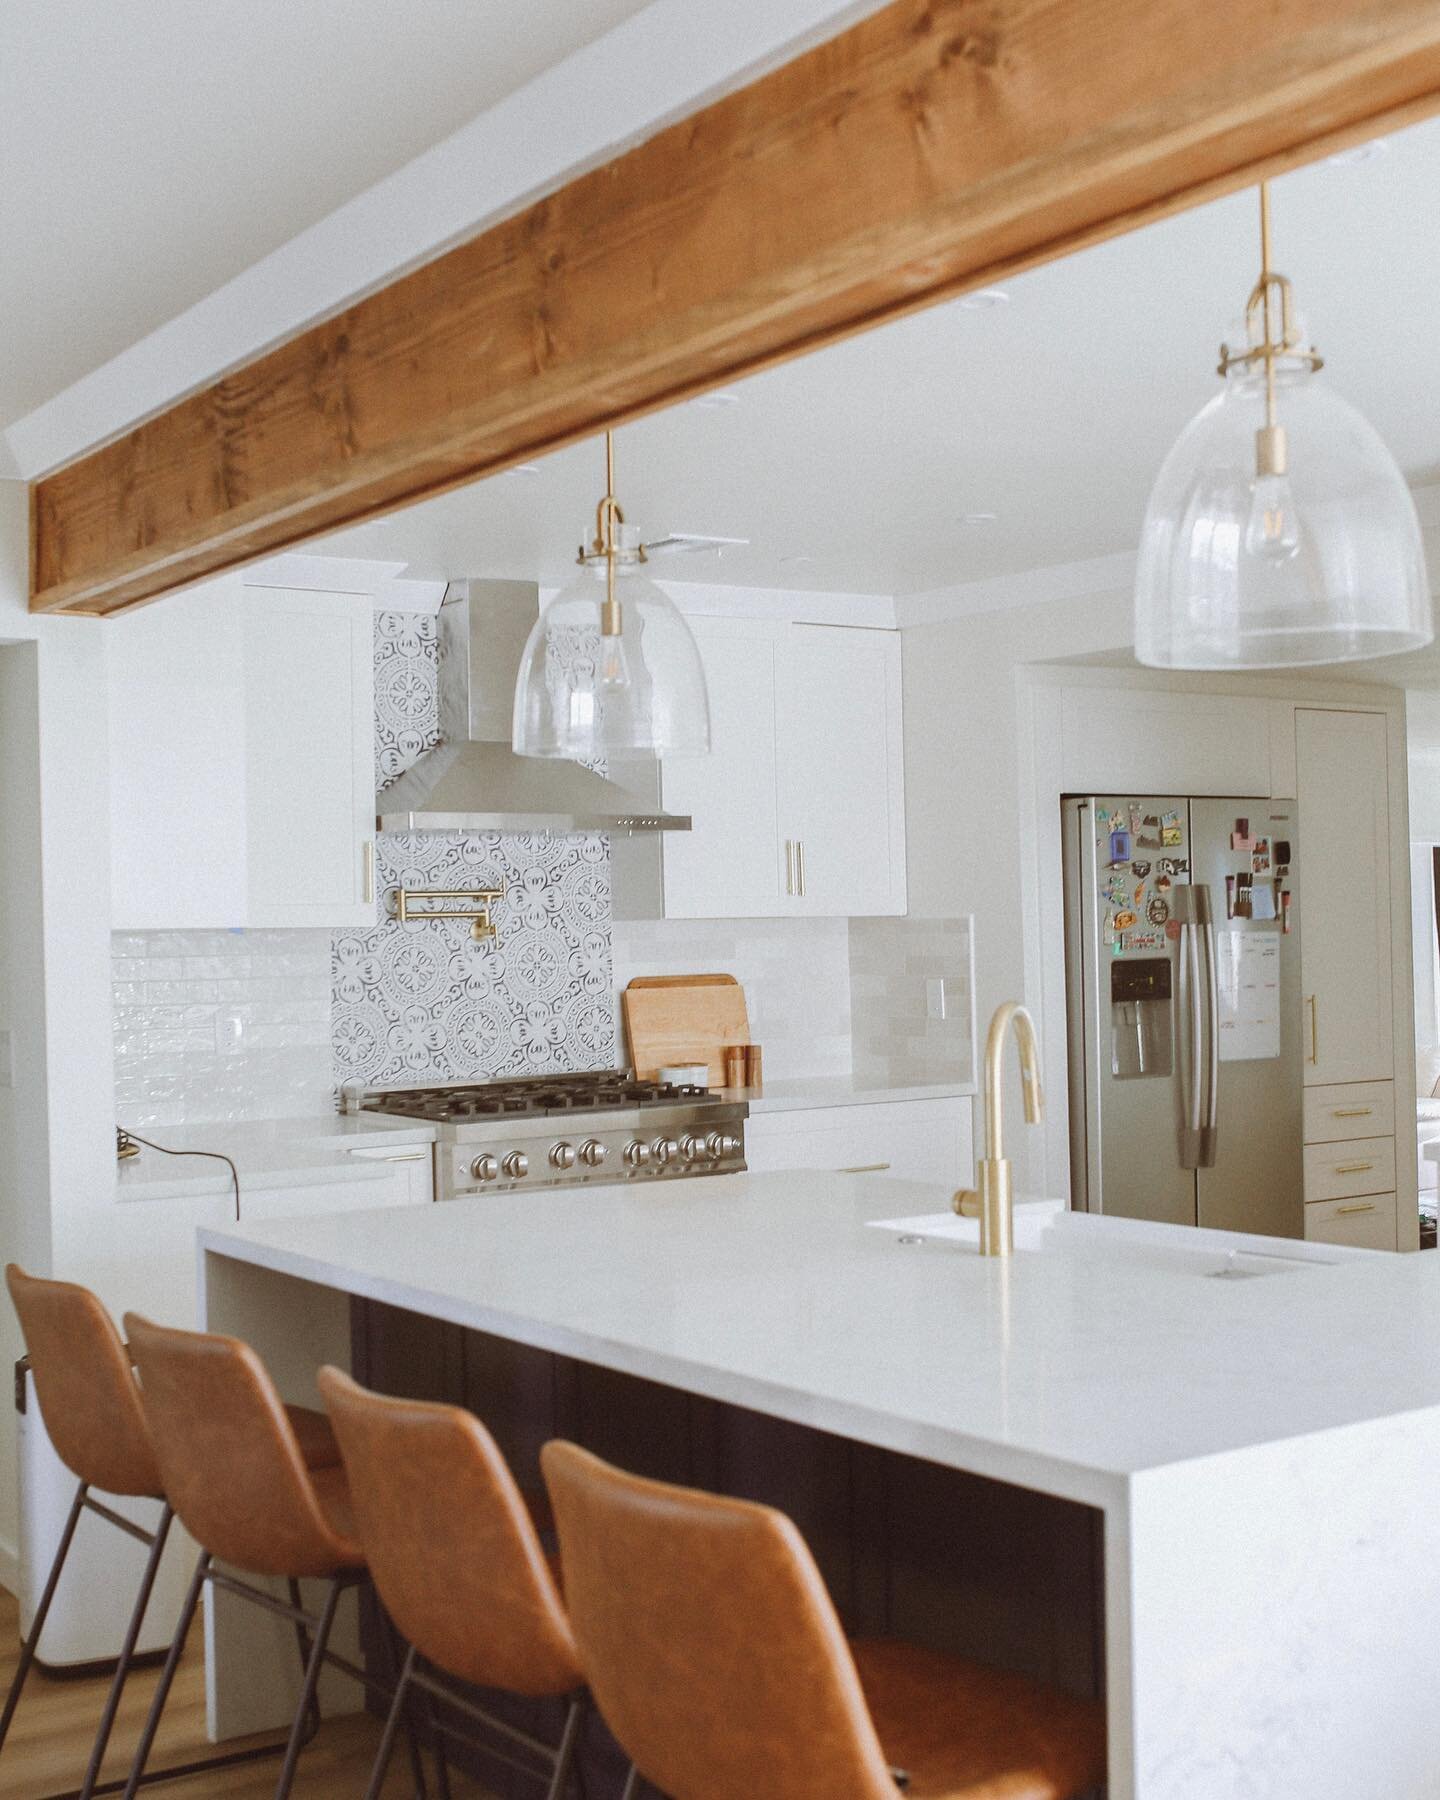 Sharing one of my favorite kitchen remodels so far&hellip; the  #barelakitchenremodel. It captures my &ldquo;signature style&rdquo; Something I&rsquo;ve been trying to perfect as I take on more design projects. 
Clean, bright, happy, calming &amp; we